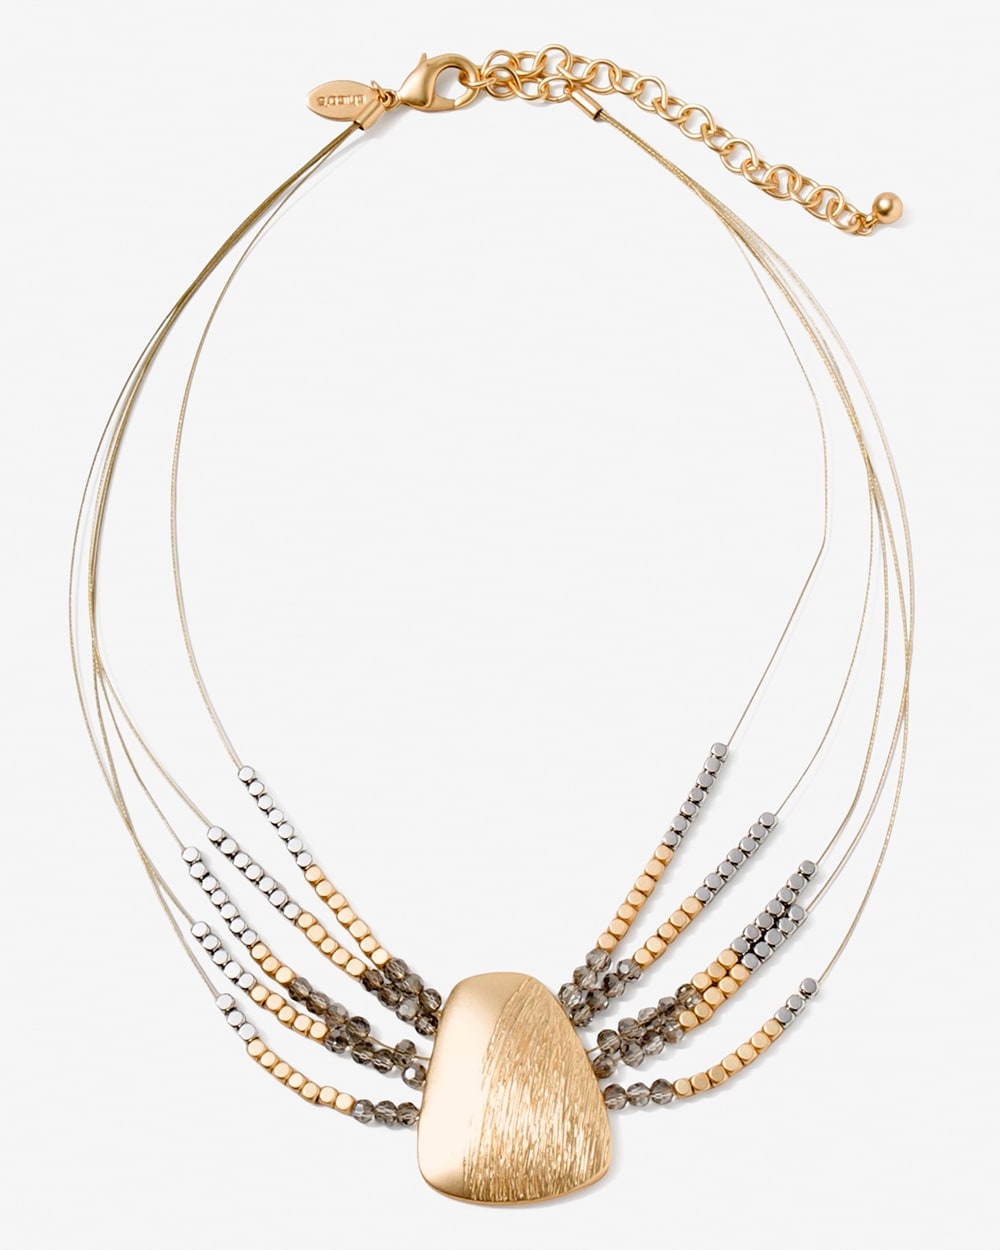 Illusion Beaded Statement Necklace